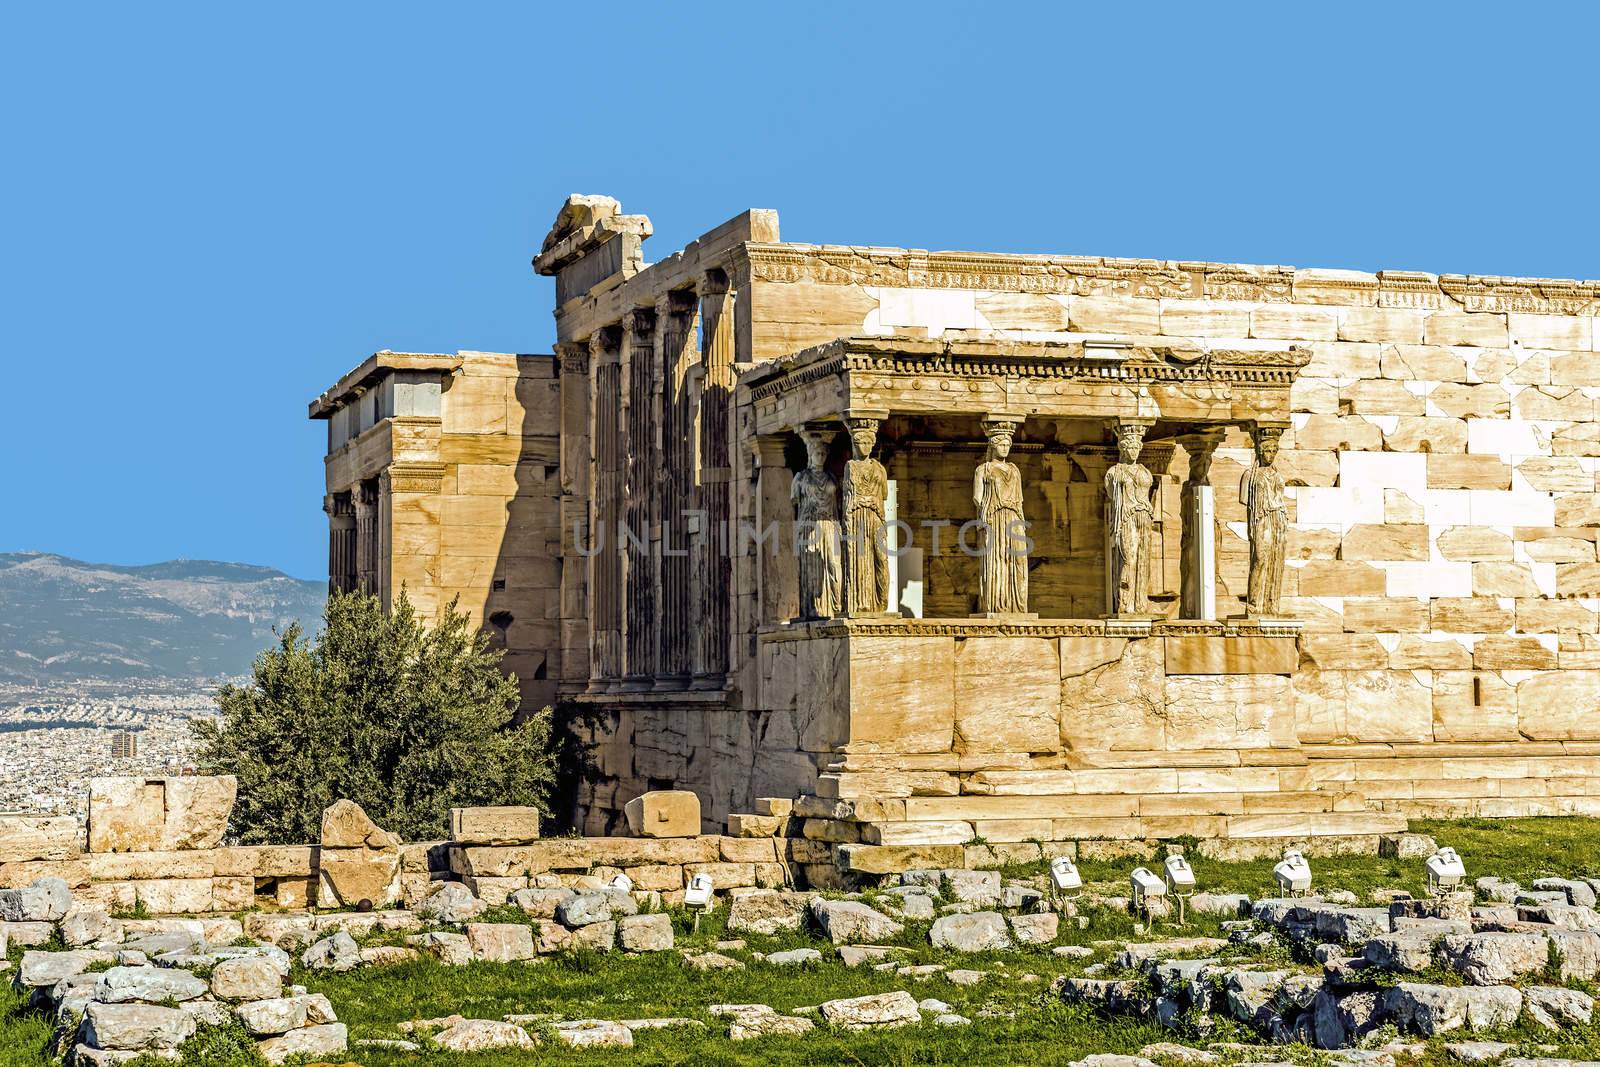 The Old Temple of Athena, an archaic temple located on the Acropolis of Athens, built around 525-500 BC. Taken in Athens, Greece.